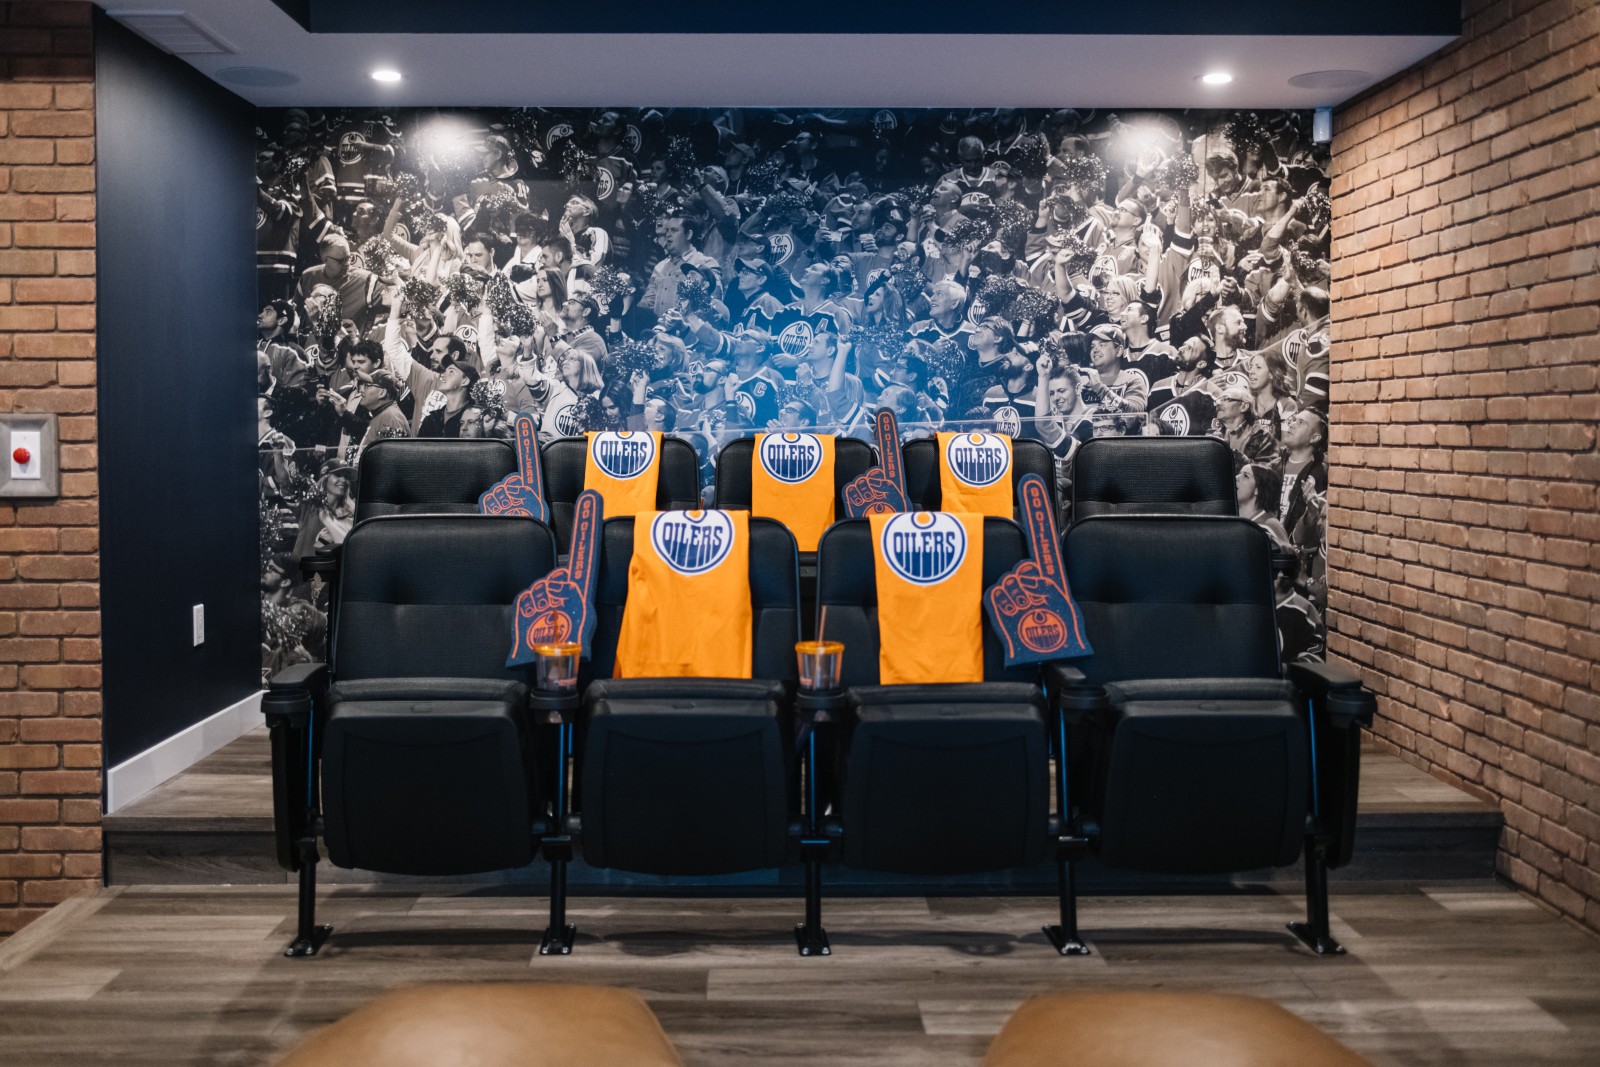 Oilers Fan Cave in the Nysa showhome with stadium seats in front of floor to ceiling, black and white mural of a crowd in an arena